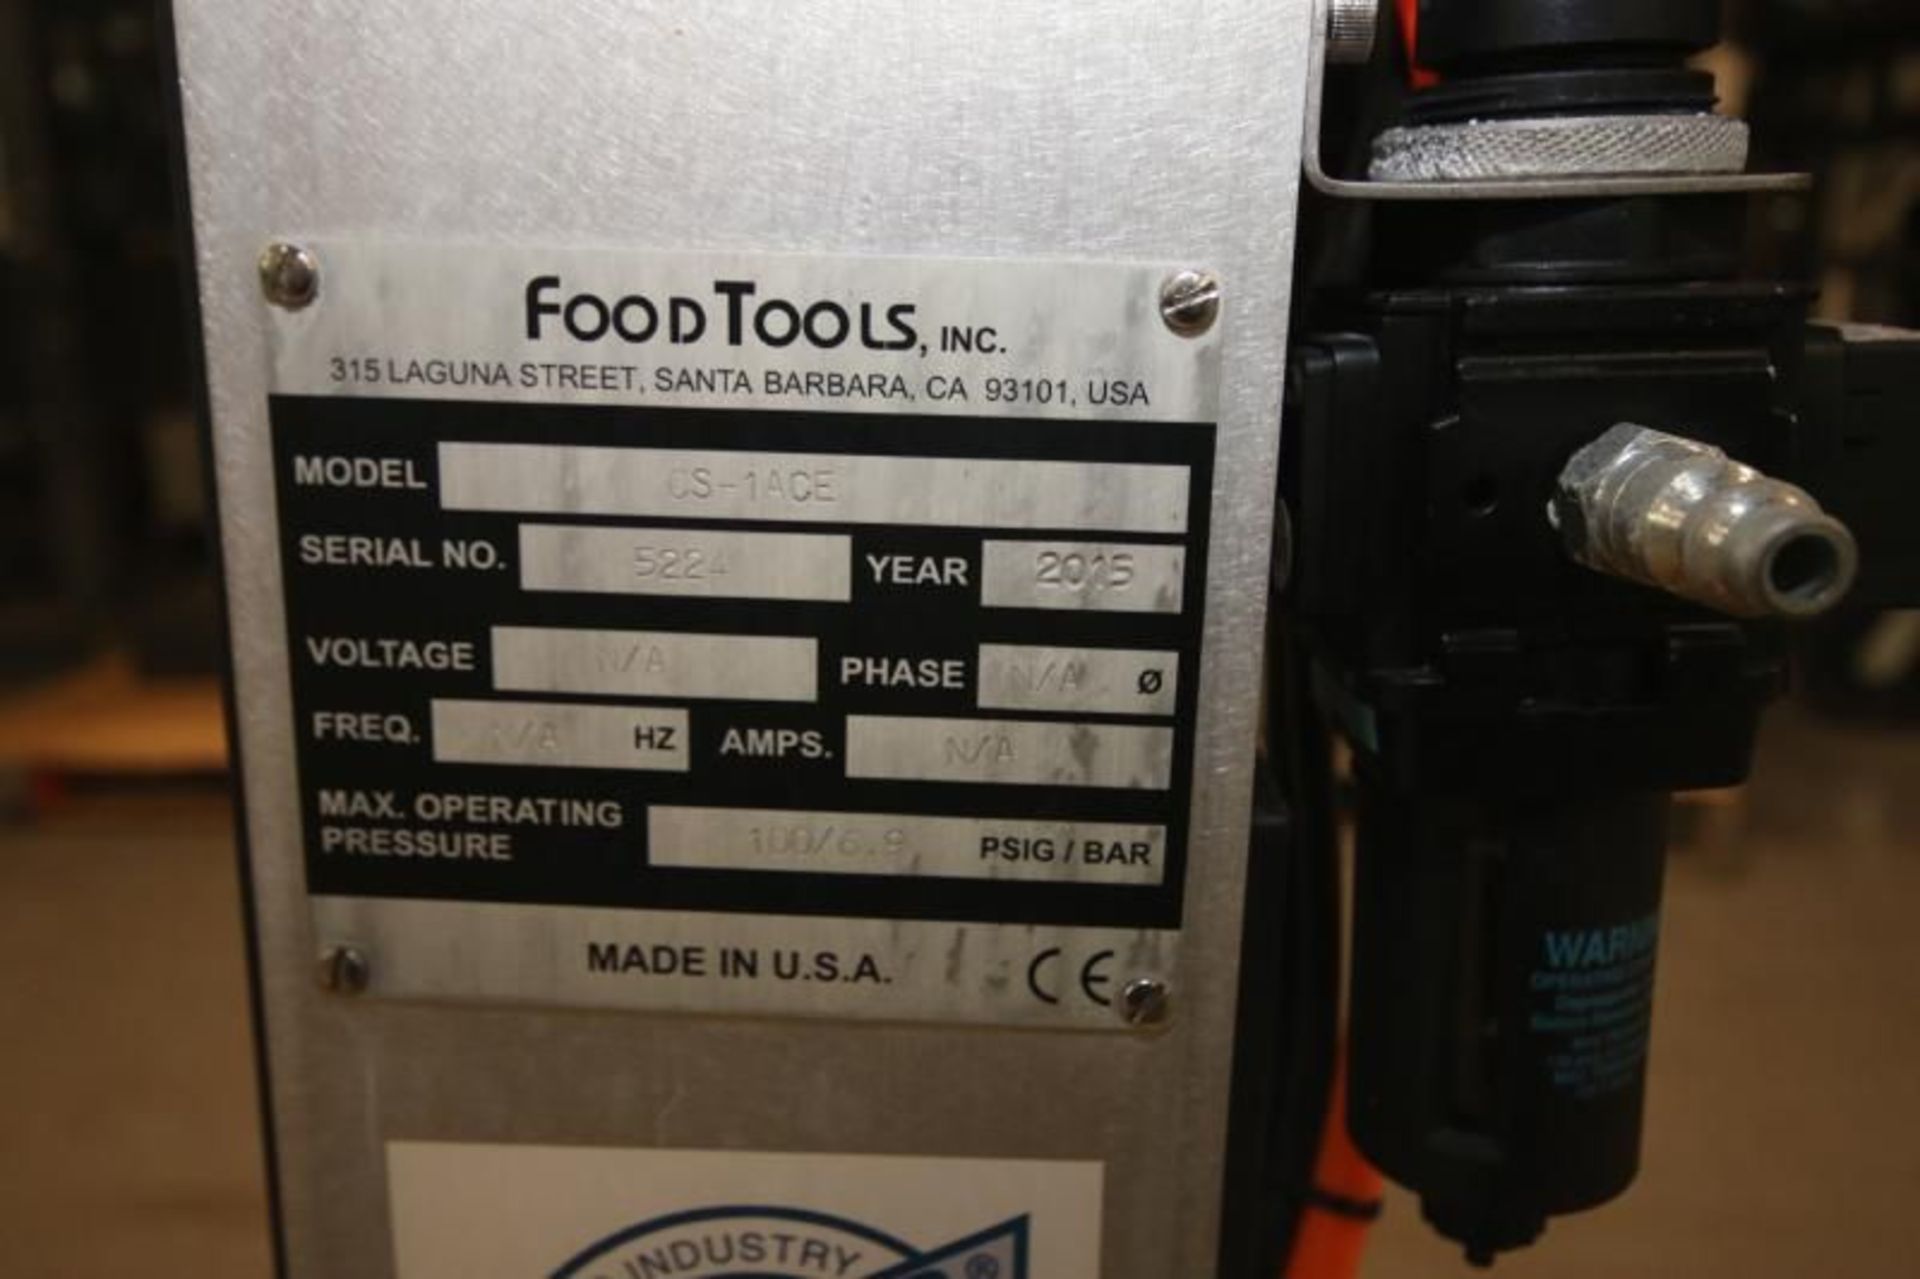 2015 Foodtools Cake Slicer, Model CS - 1ACE, SN 5224, 100 psi (Located at the MDG Auction Showroom - Image 4 of 4